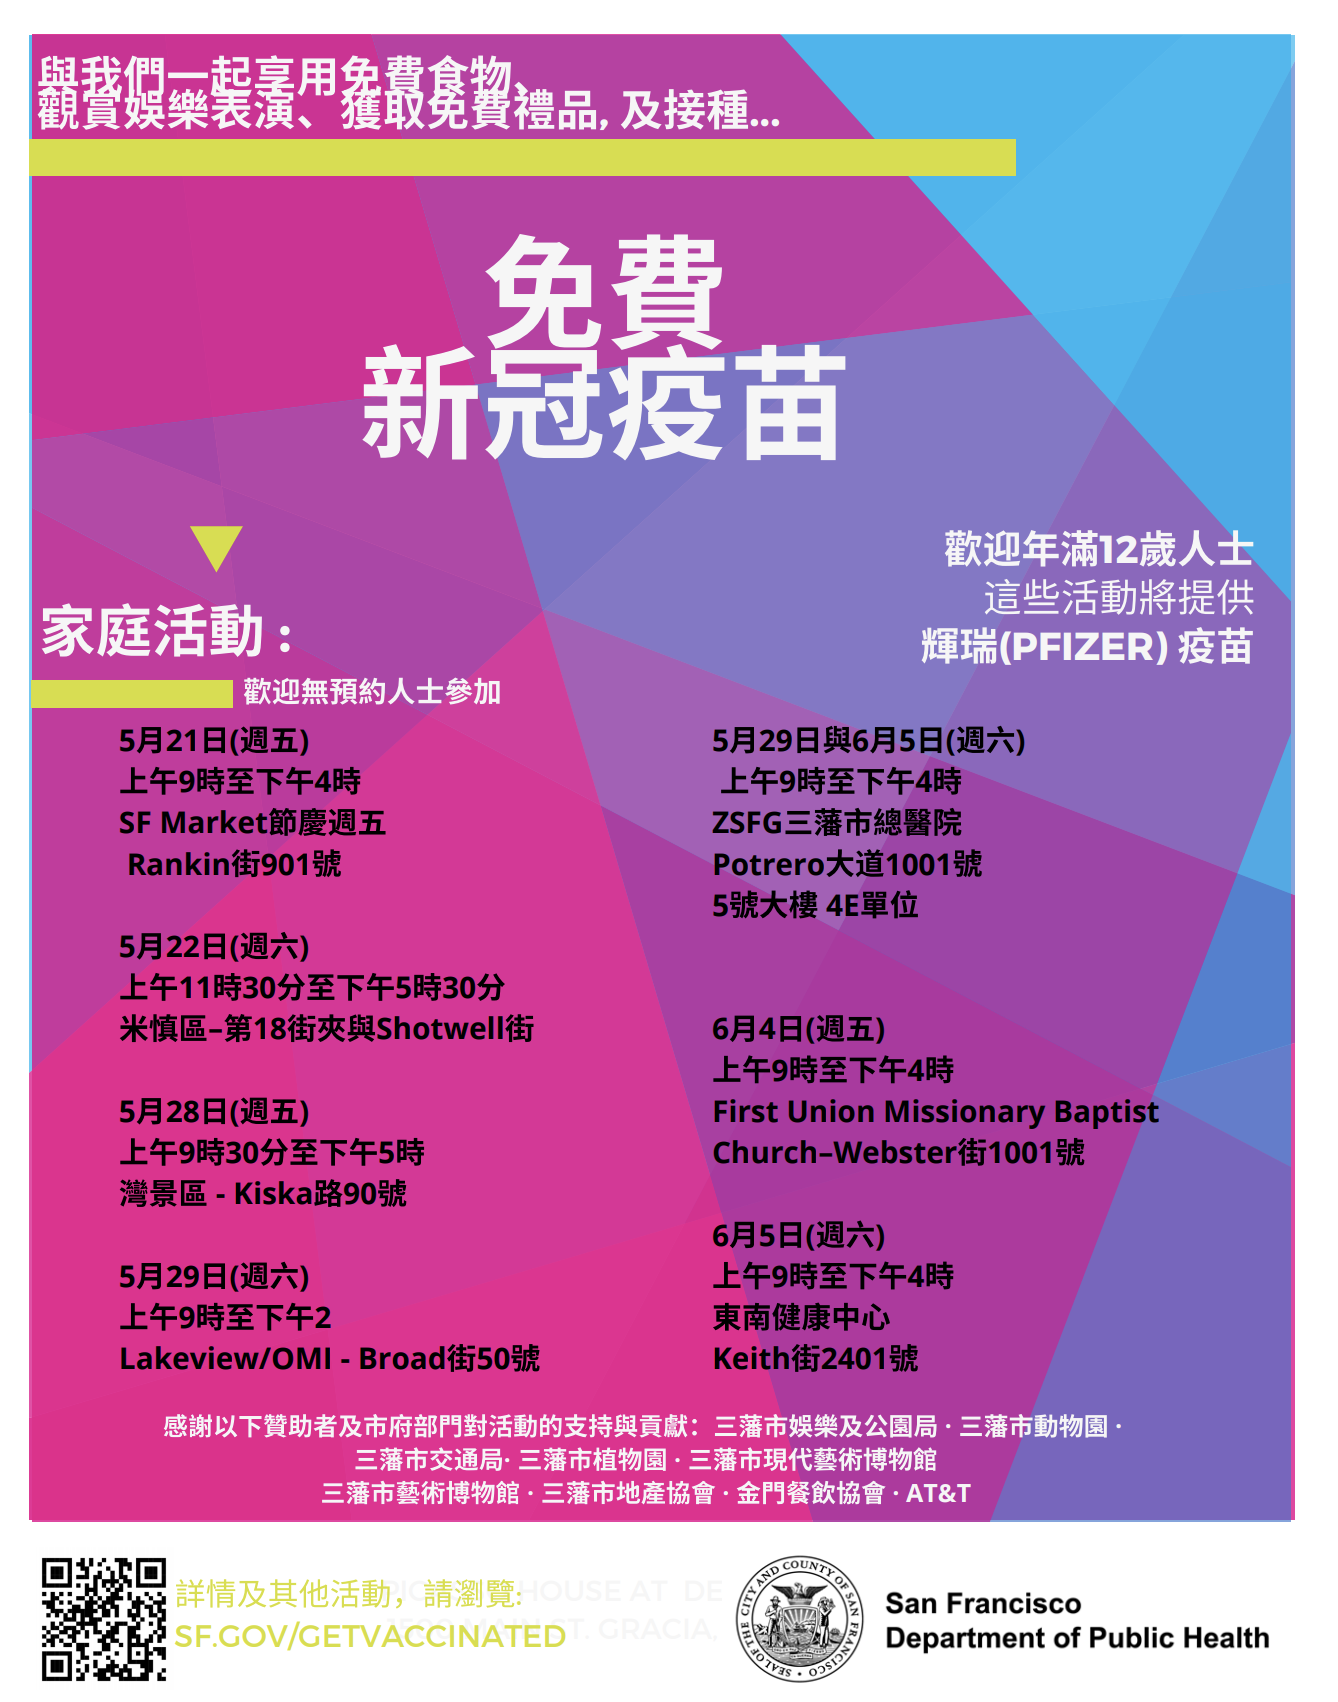 Free Covid-19 Vaccines Chinese Flyer